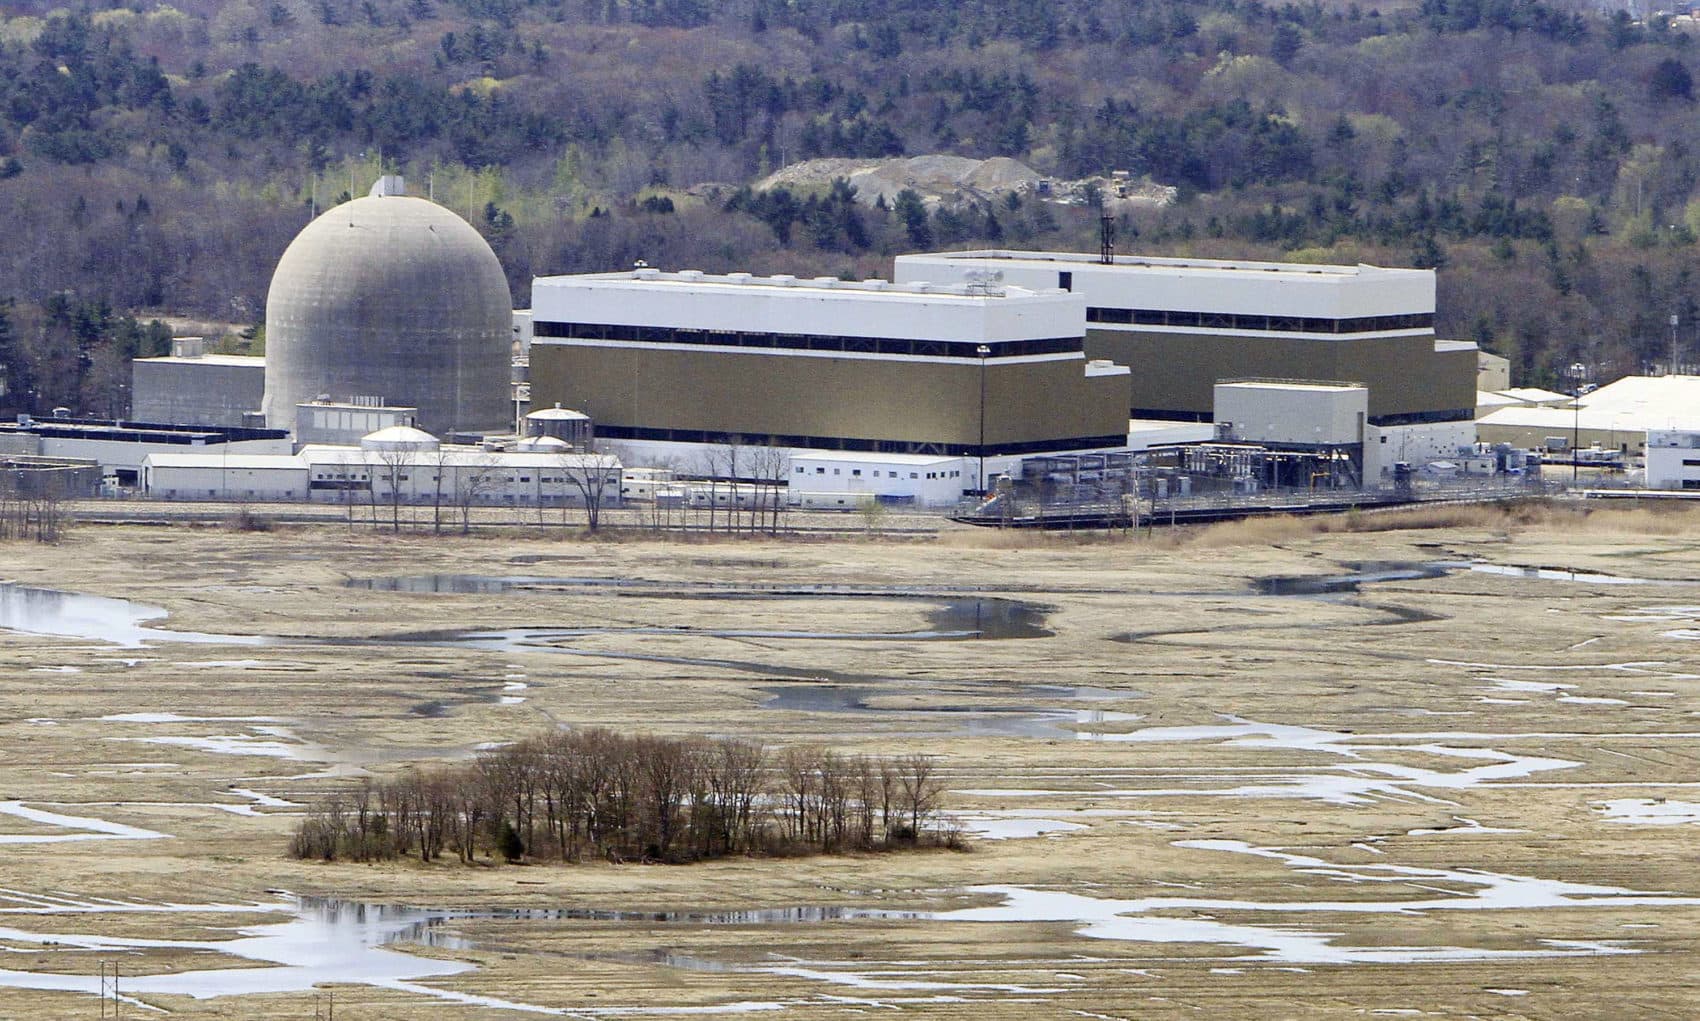 The Seabrook nuclear power plant in Seabrook, N.H., in a 2011 file photo (Jim Cole/AP)